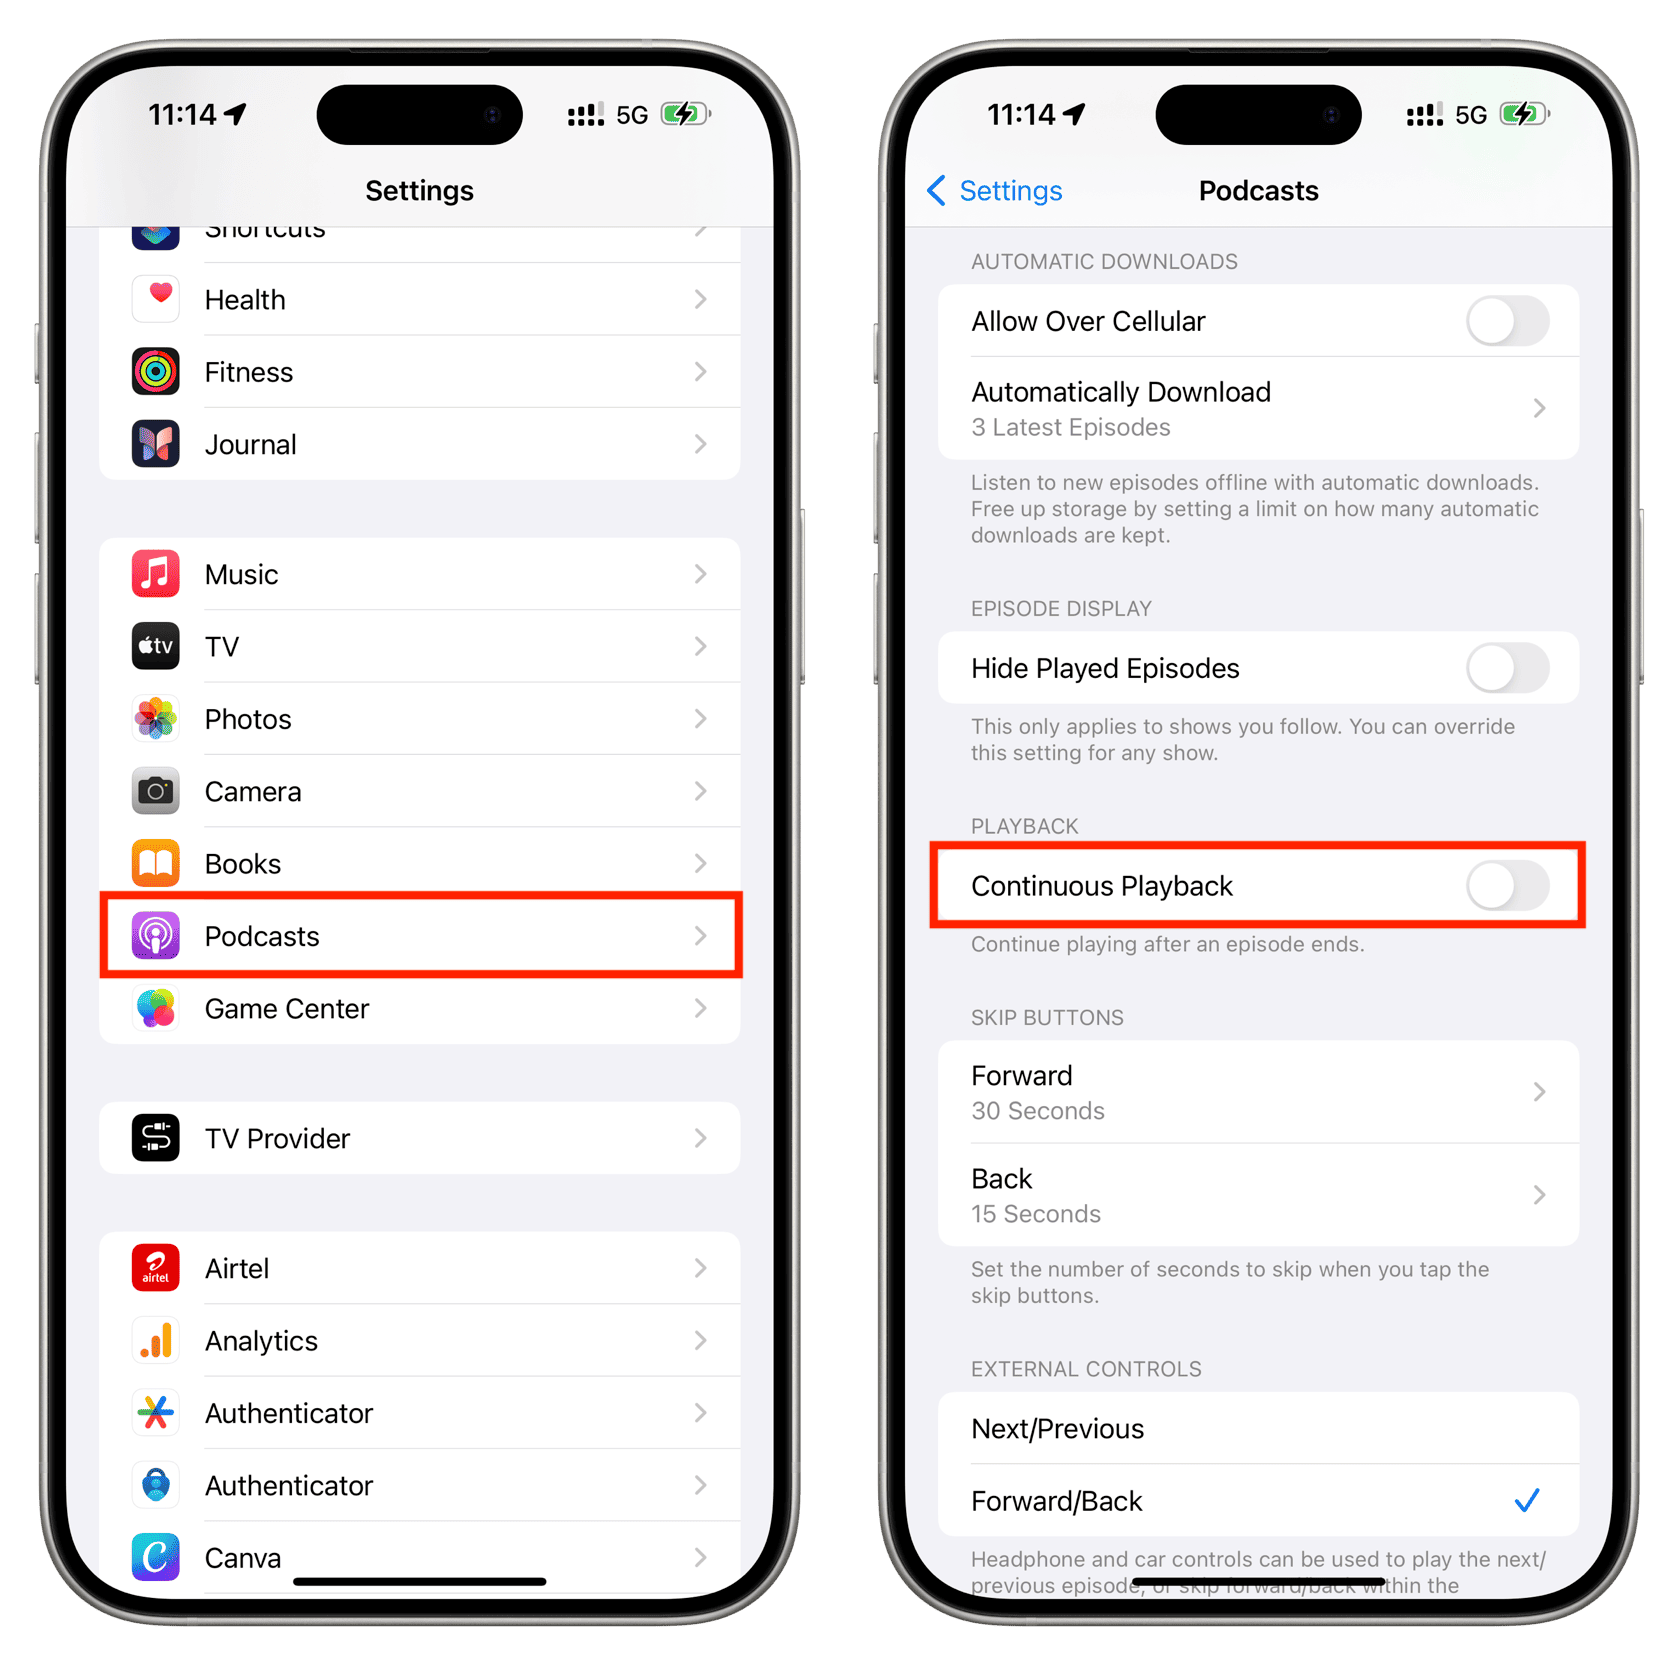 Turn off Continuous Playback for Podcasts on iPhone